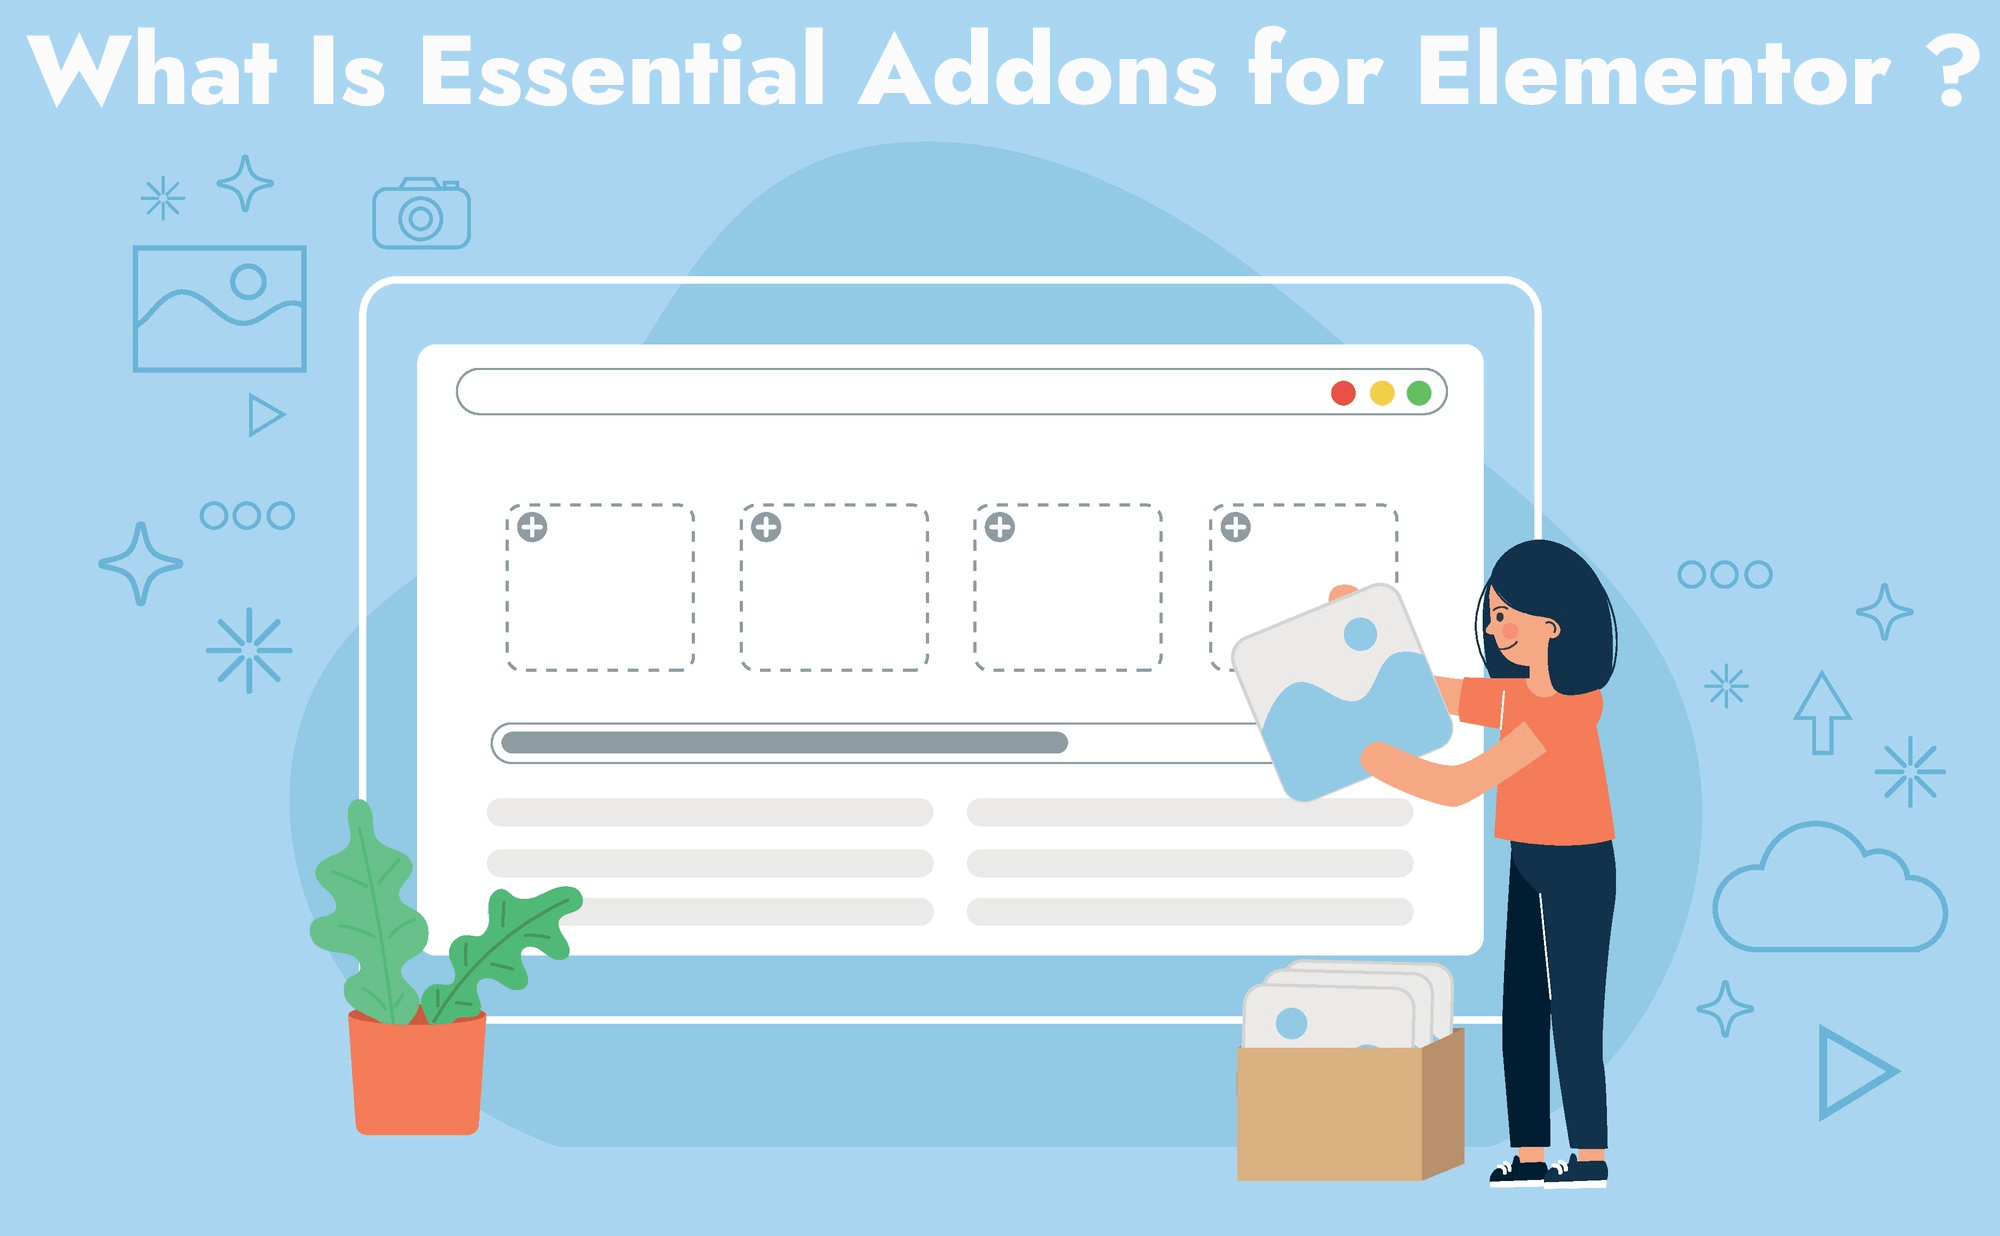 What Is Essential Addons for Elementor?